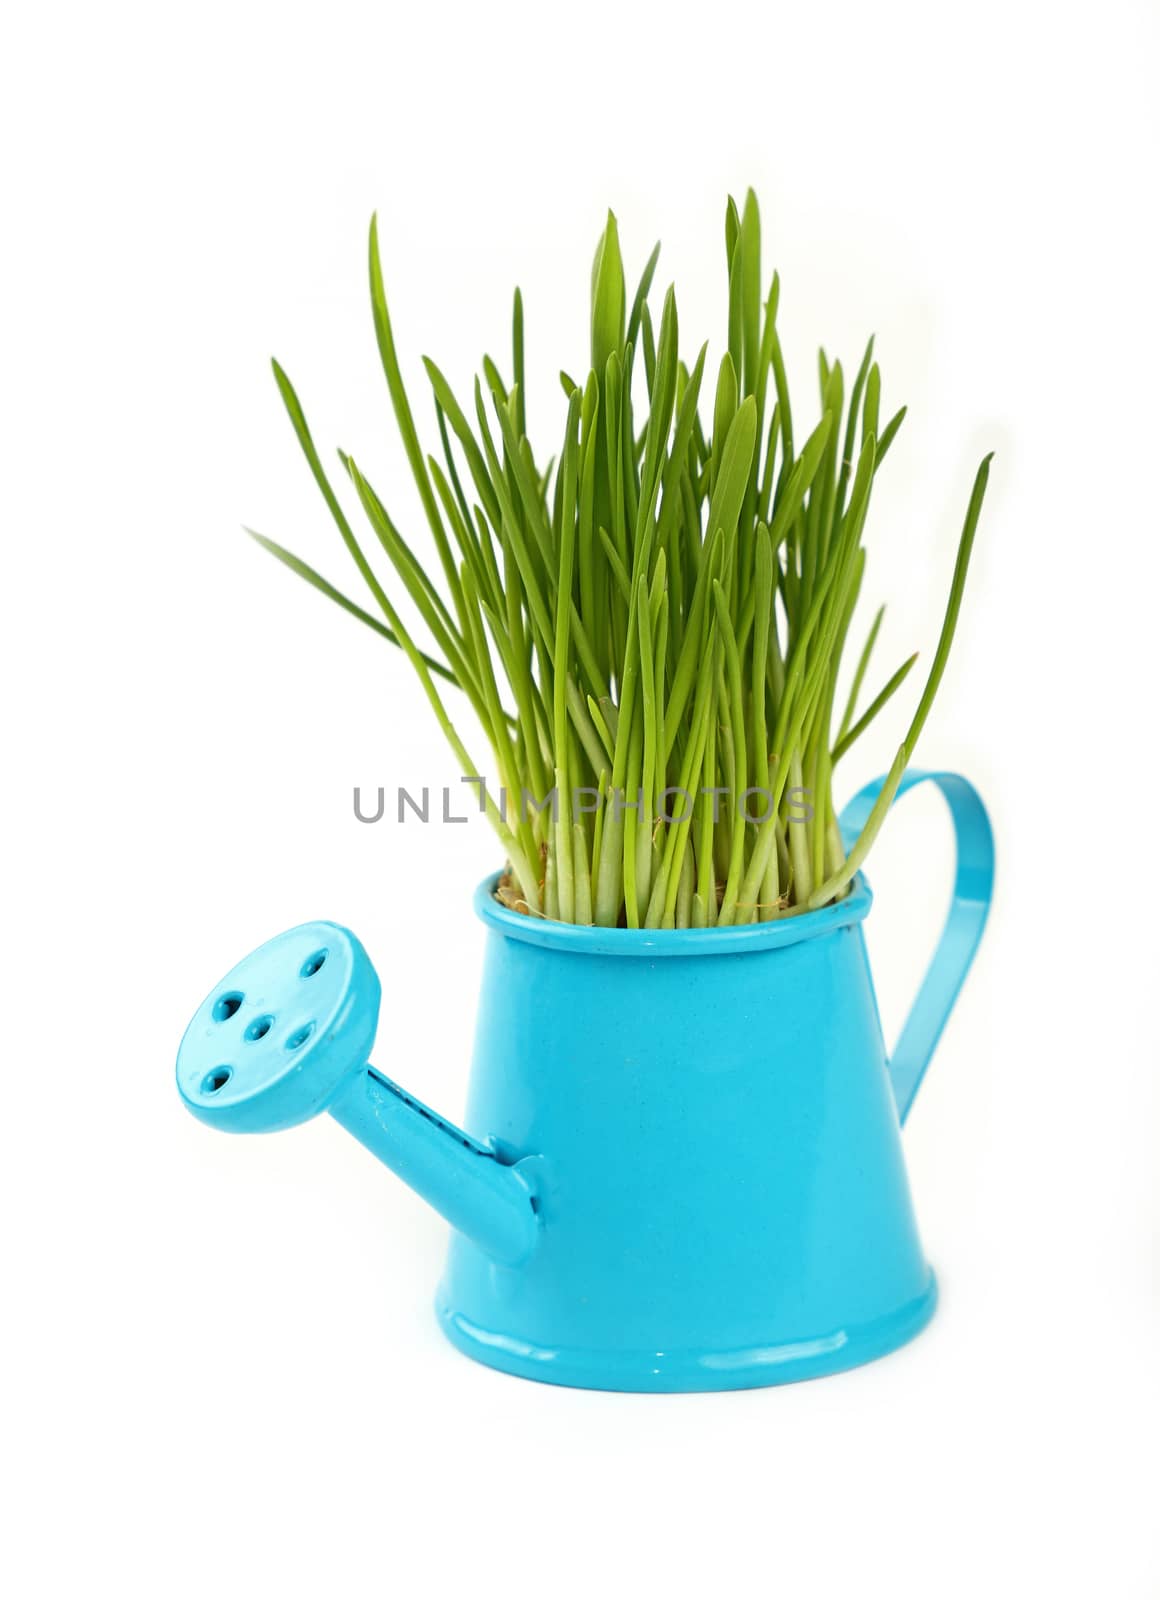 Spring fresh green grass growing in small blue metal watering pot, close up over white background, side view